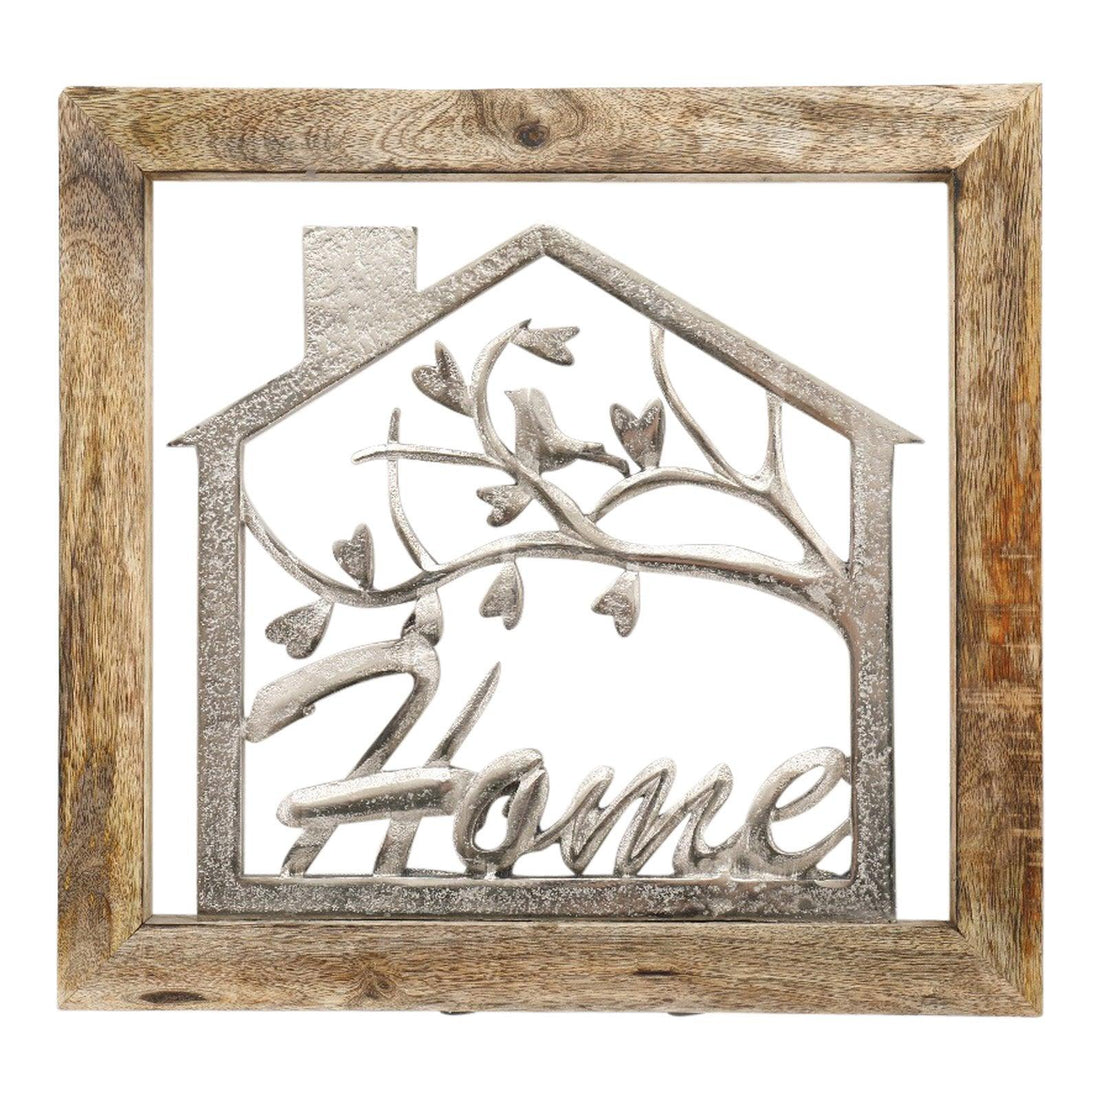 Wall Hanging Silver House In Wooden Frame 20cm - £20.99 - Pictures 